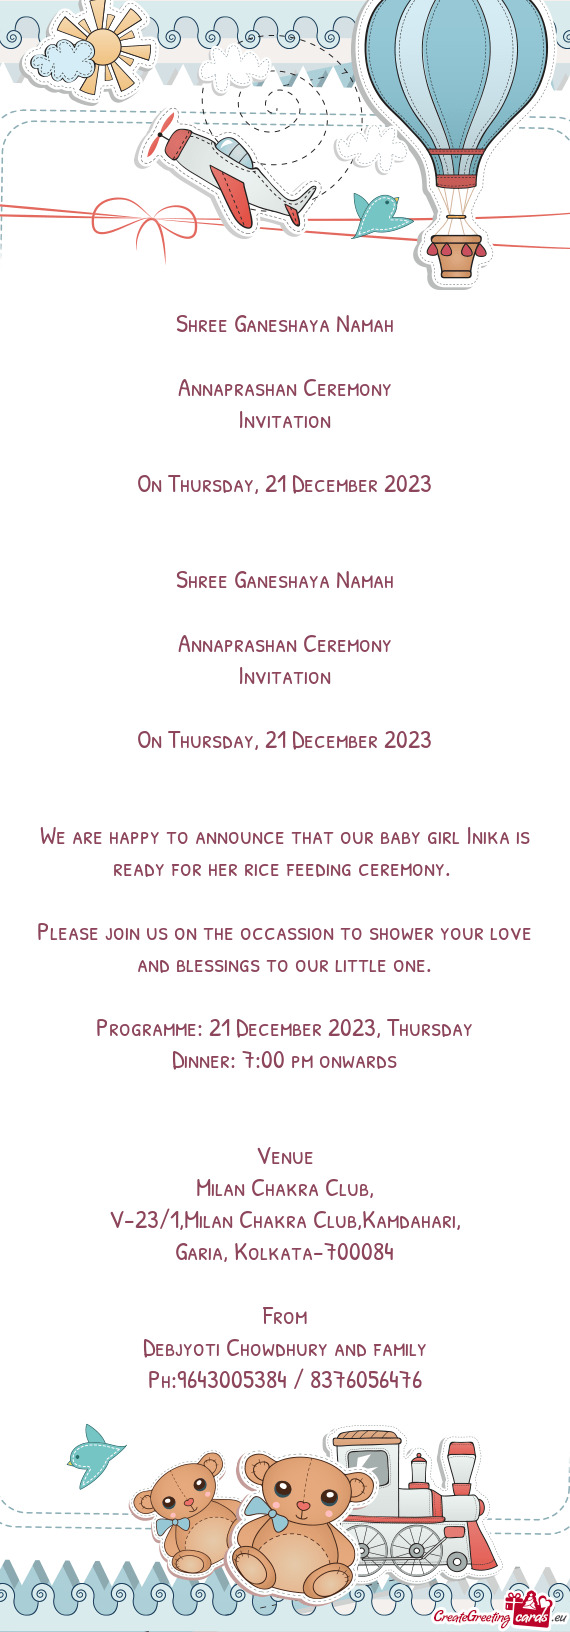 Please join us on the occassion to shower your love and blessings to our little one